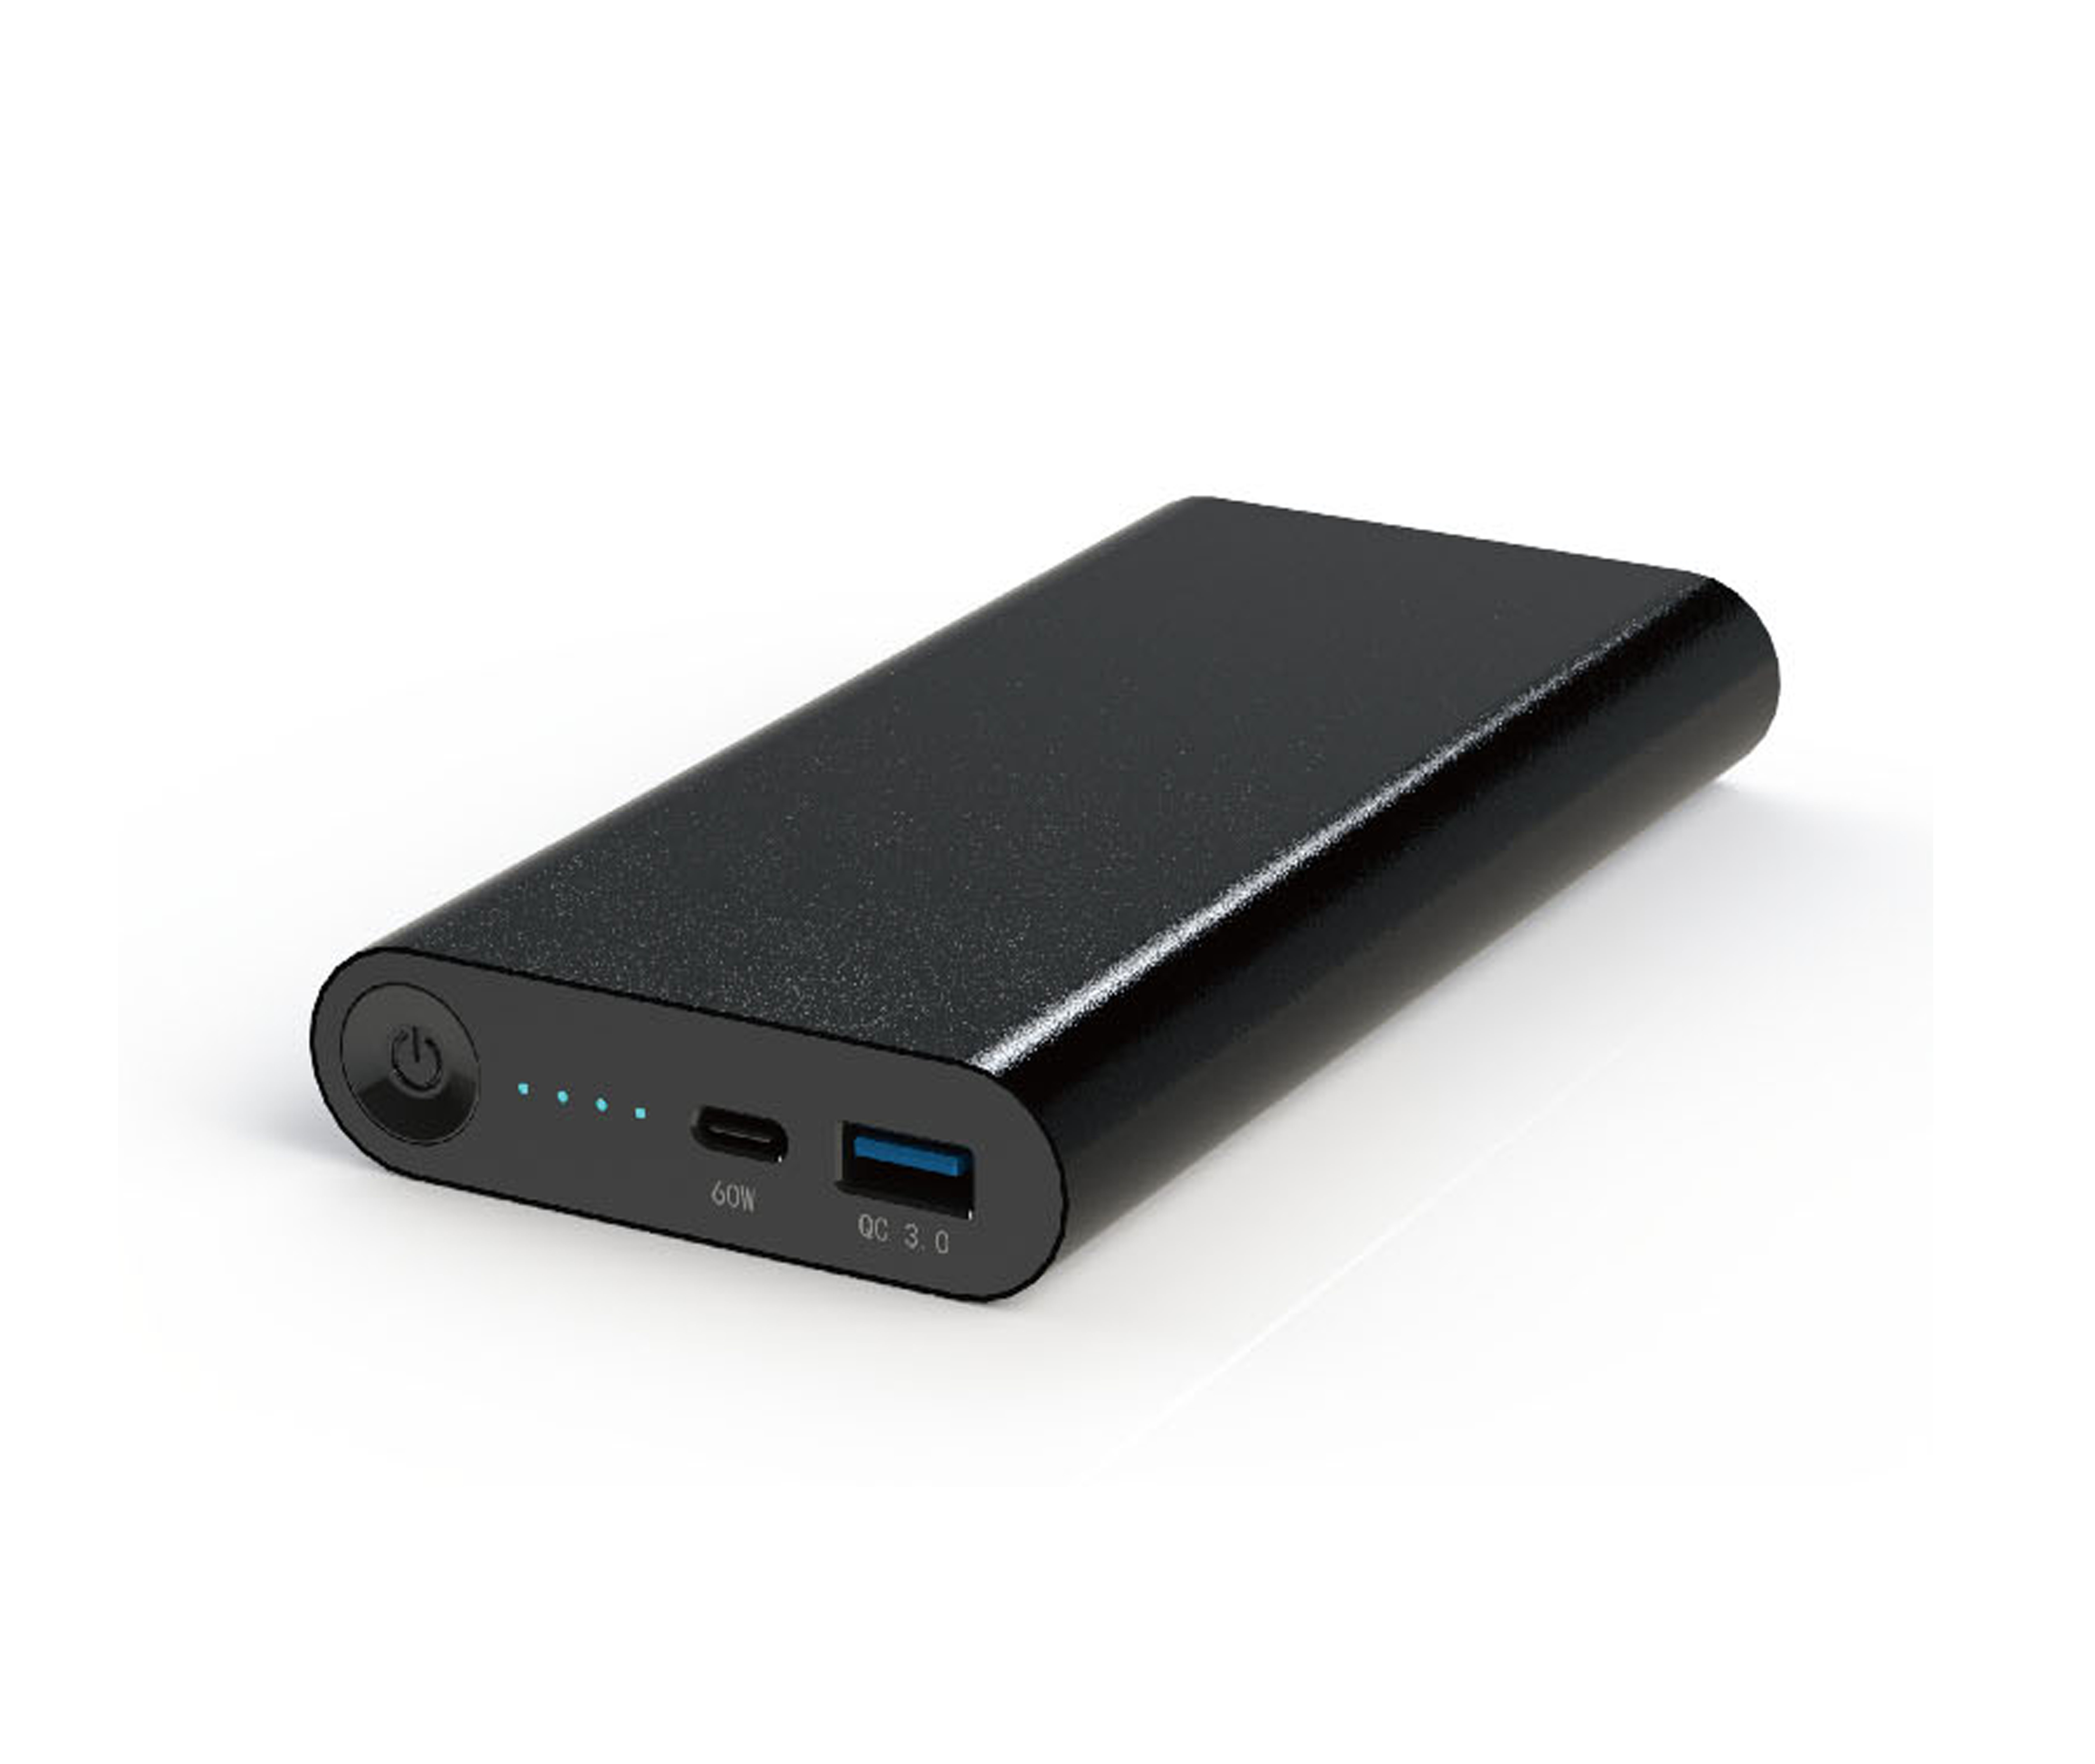 PD 60W Power bank PS-300